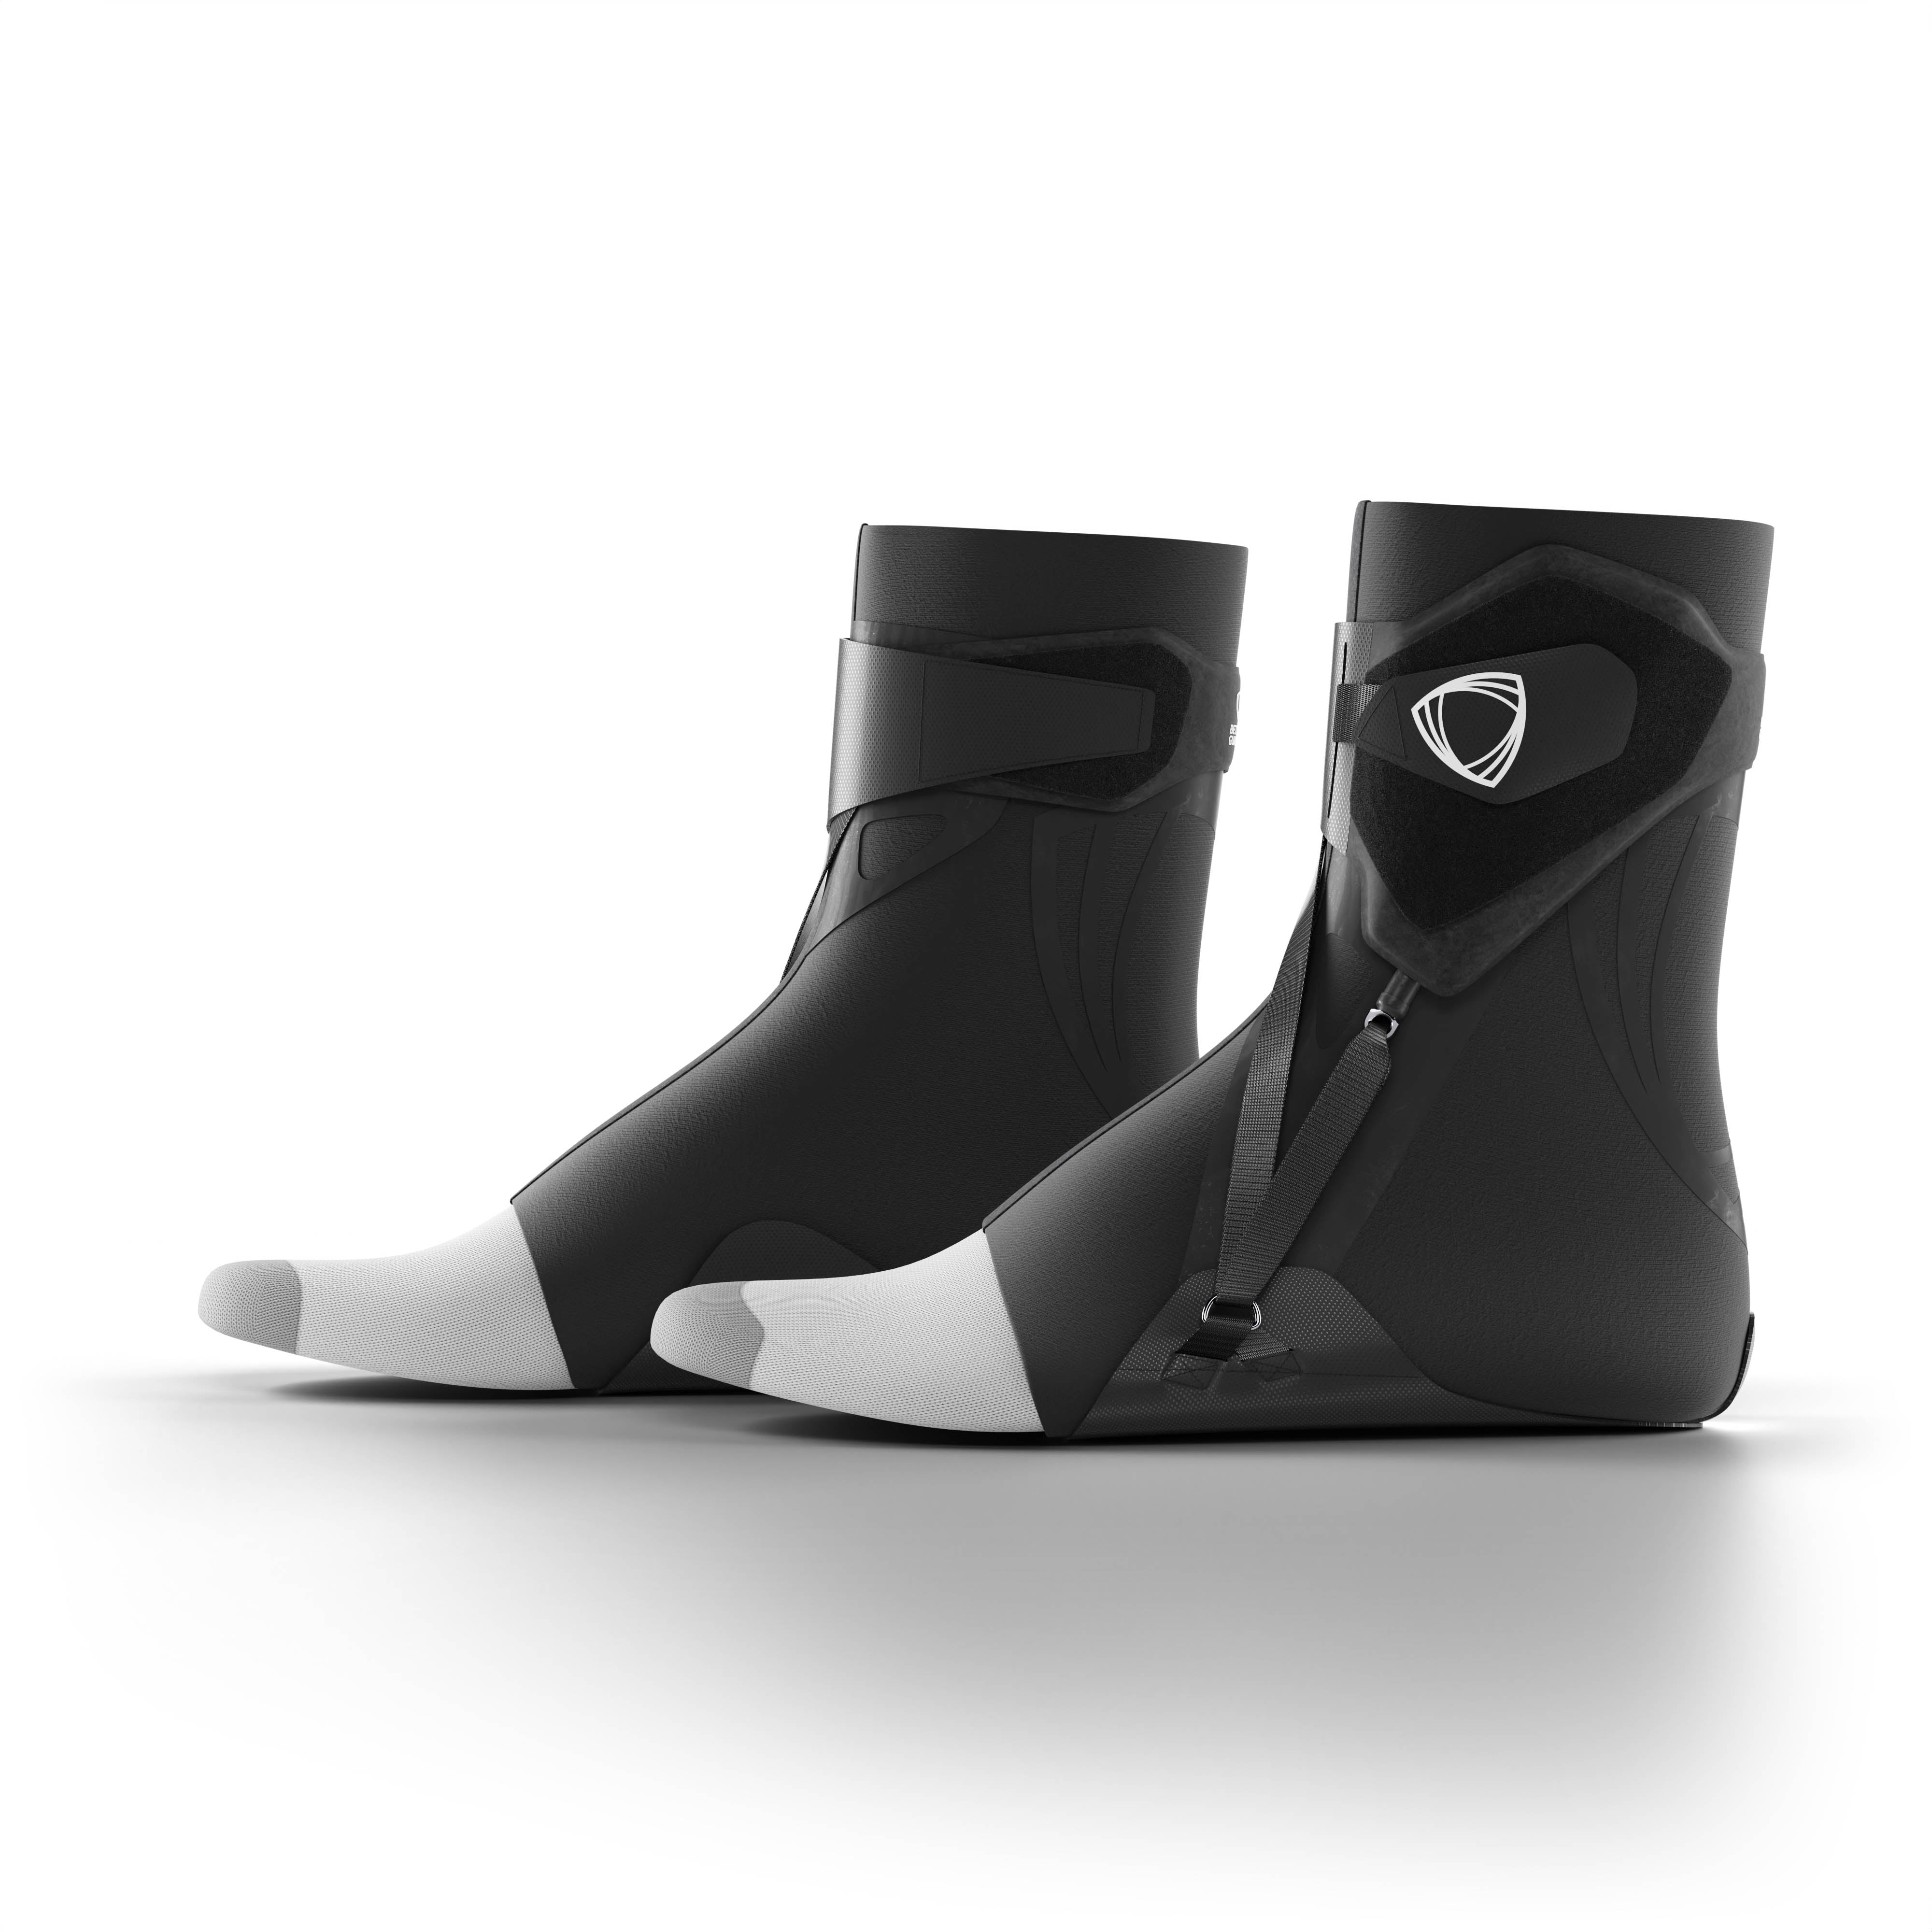 Pair of the best ankle braces for all sports ankle support. Side view. #color_black